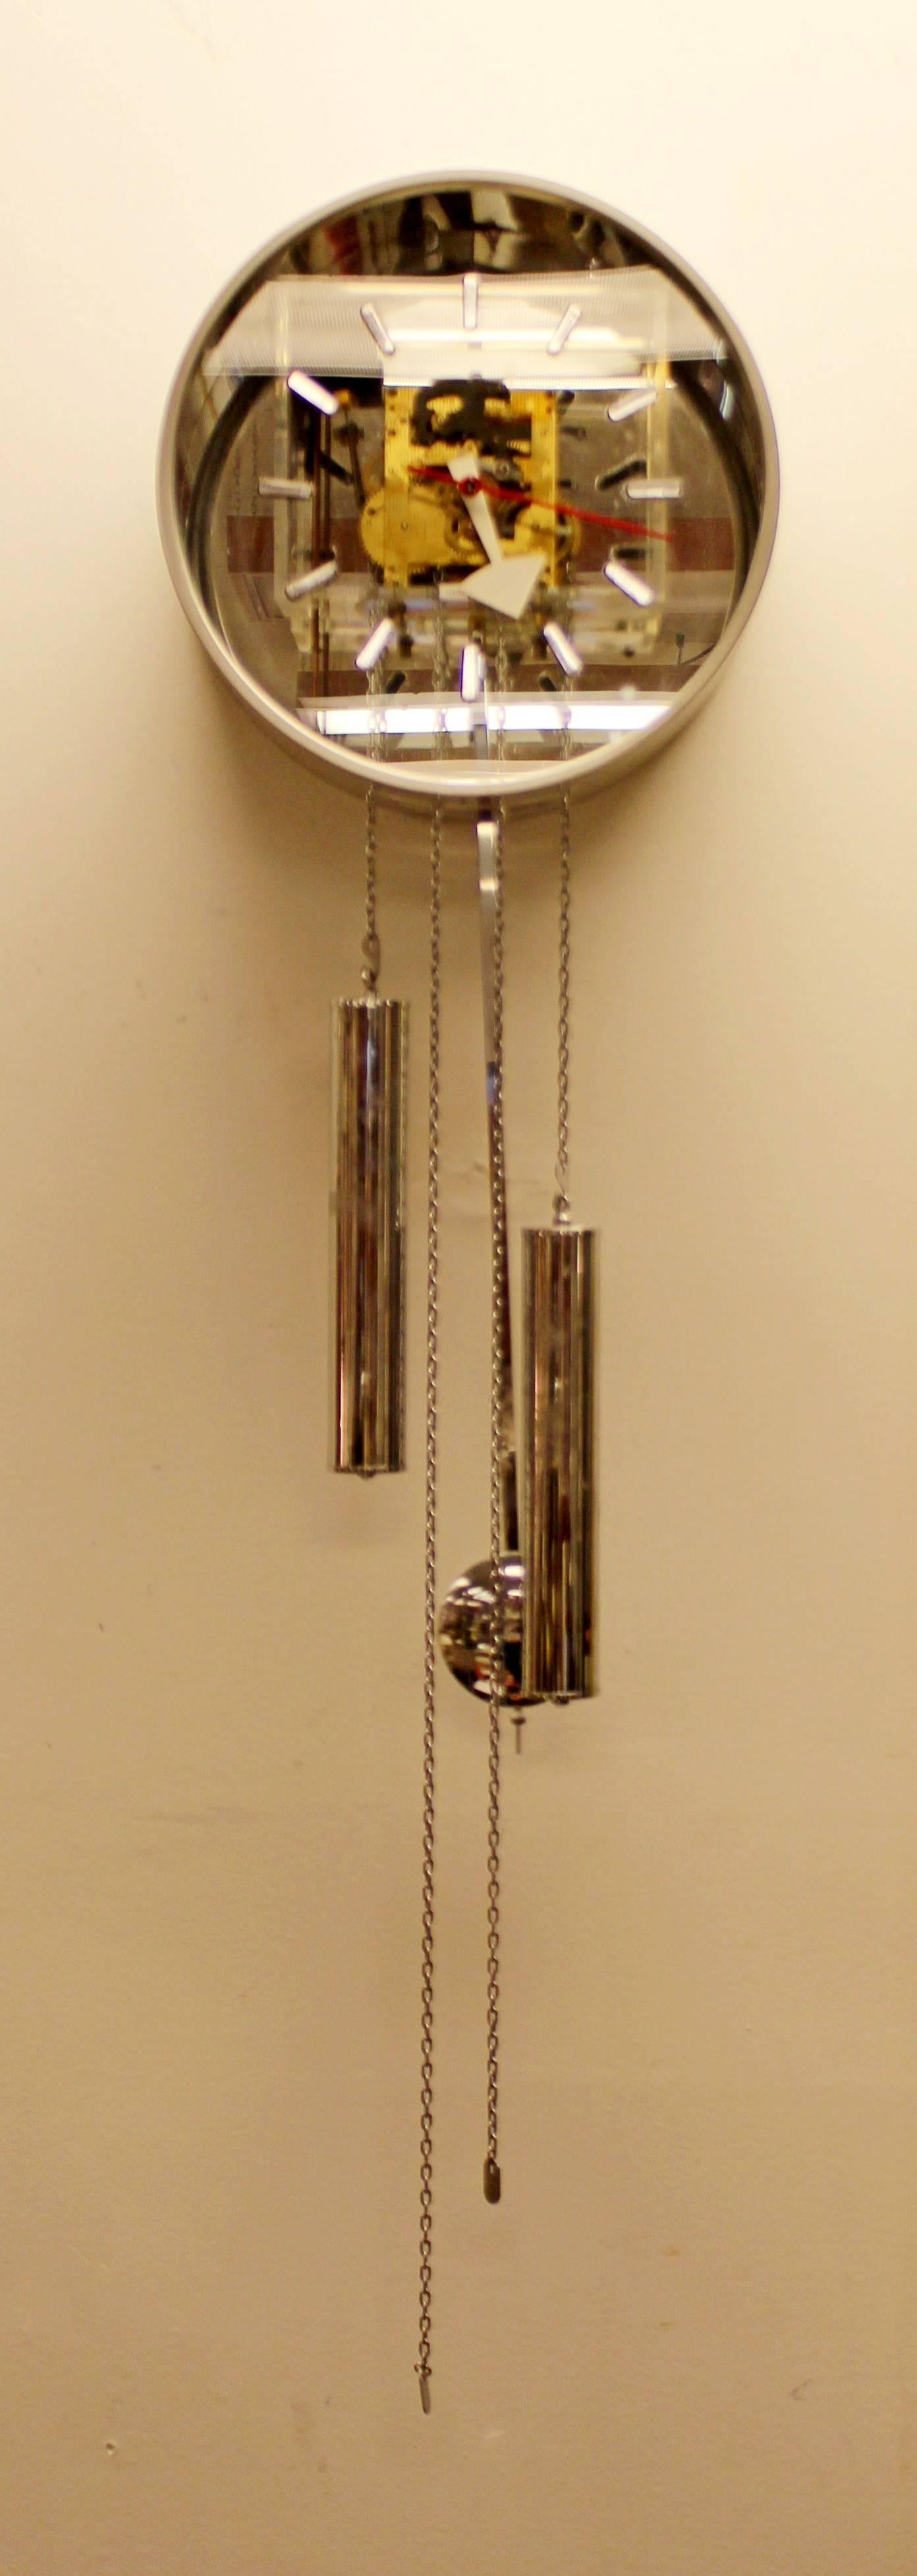 Pendulum wall-mounted clock by George Nelson for Howard Miller made of aluminium, chrome and Lucite. The face of the clock is 12